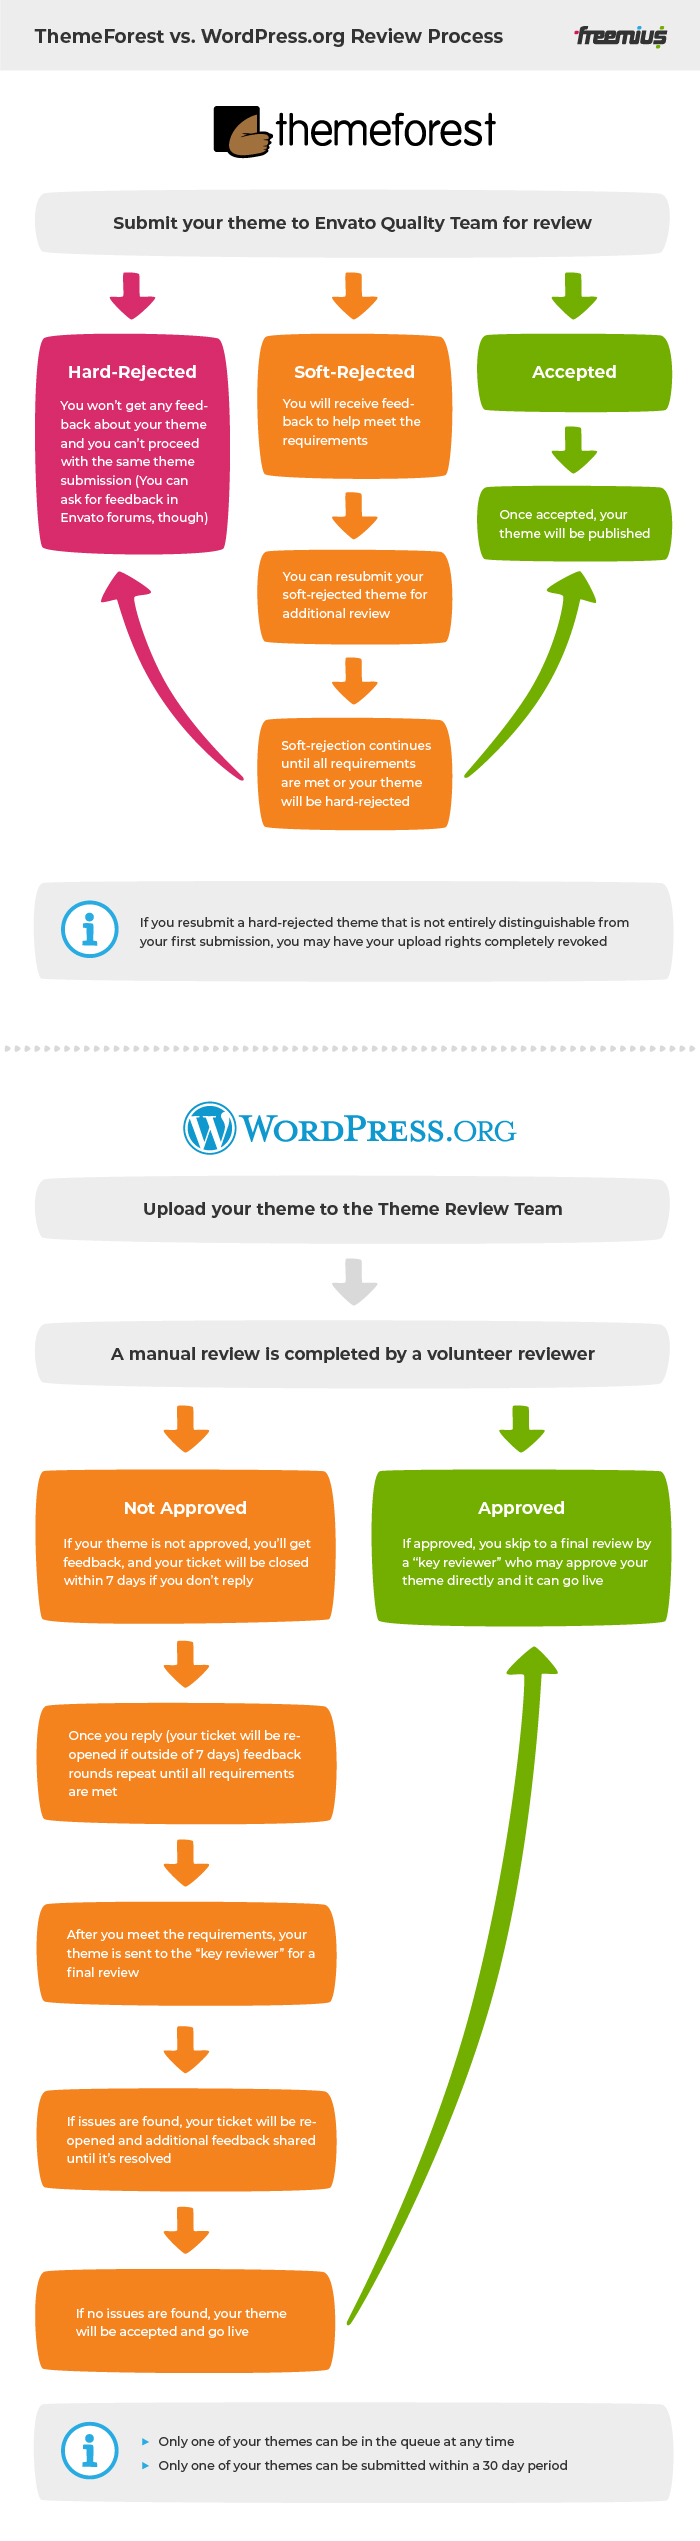 ThemeForest vs WordPress.org Theme Review Process Side by Side comparison Infographic